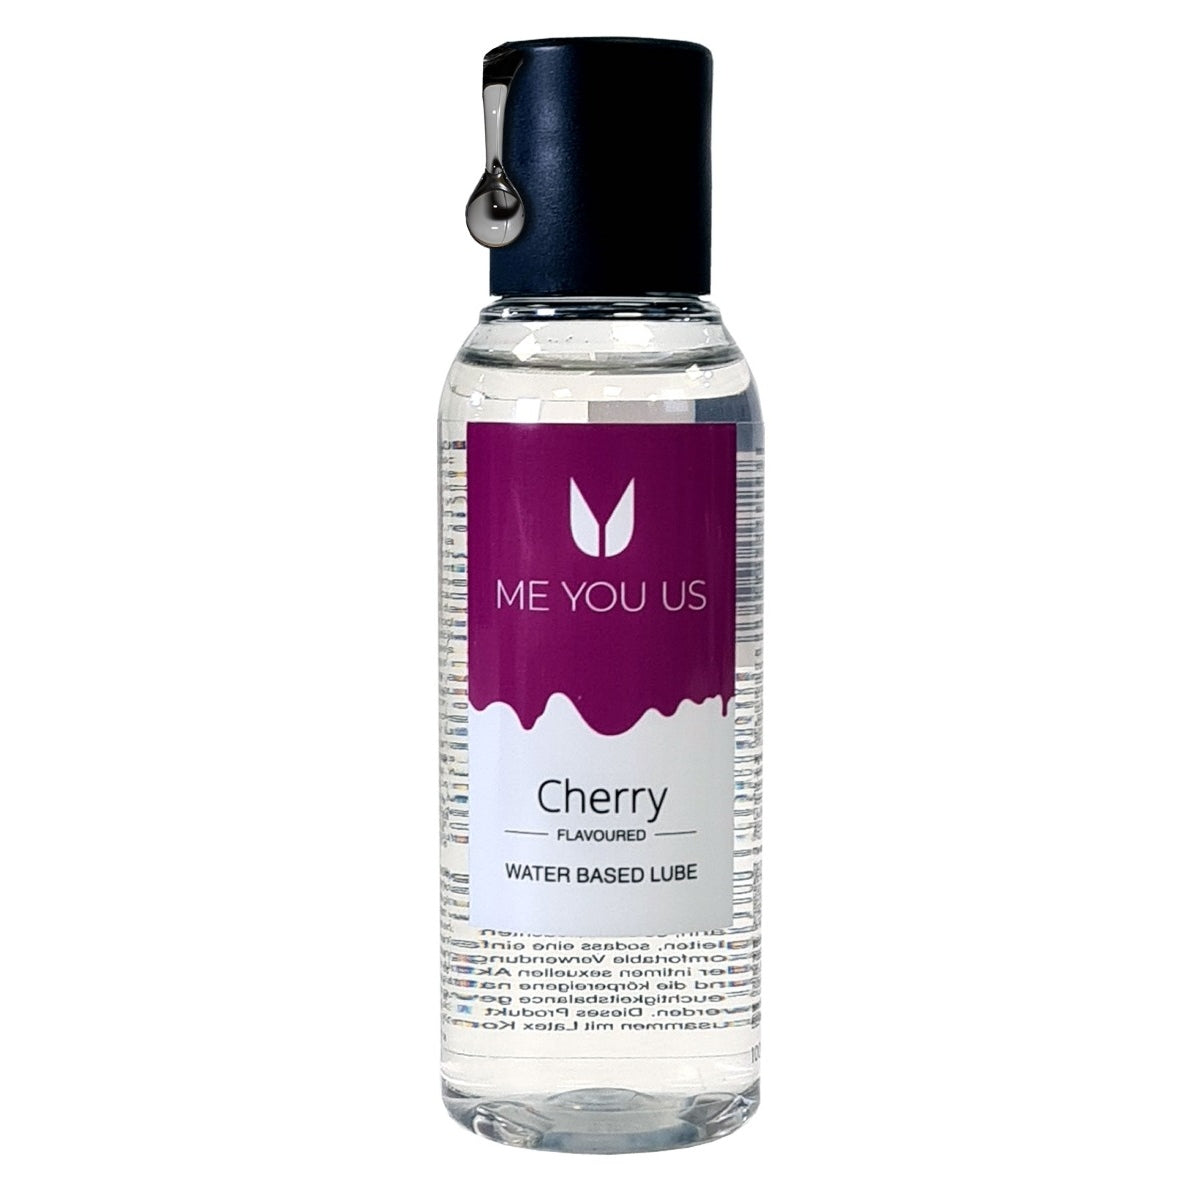 Me You Us Flavoured Water Based Lube Cherry 100ml - Simply Pleasure